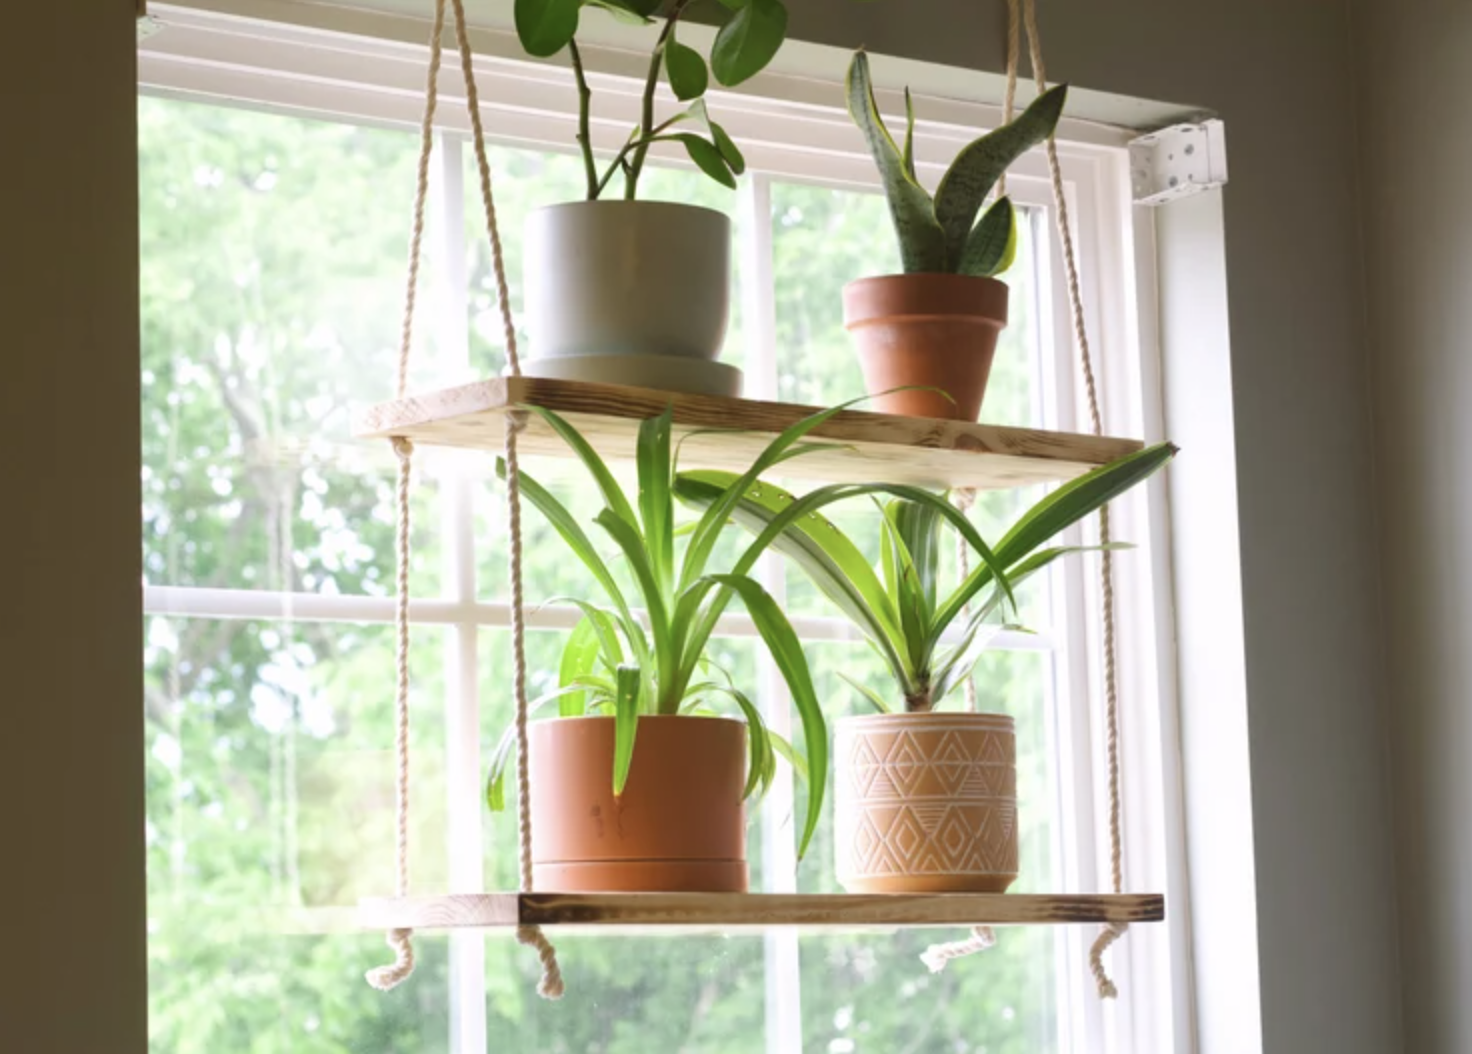 The hanging shelf with potted plants on it is shown in front of a window